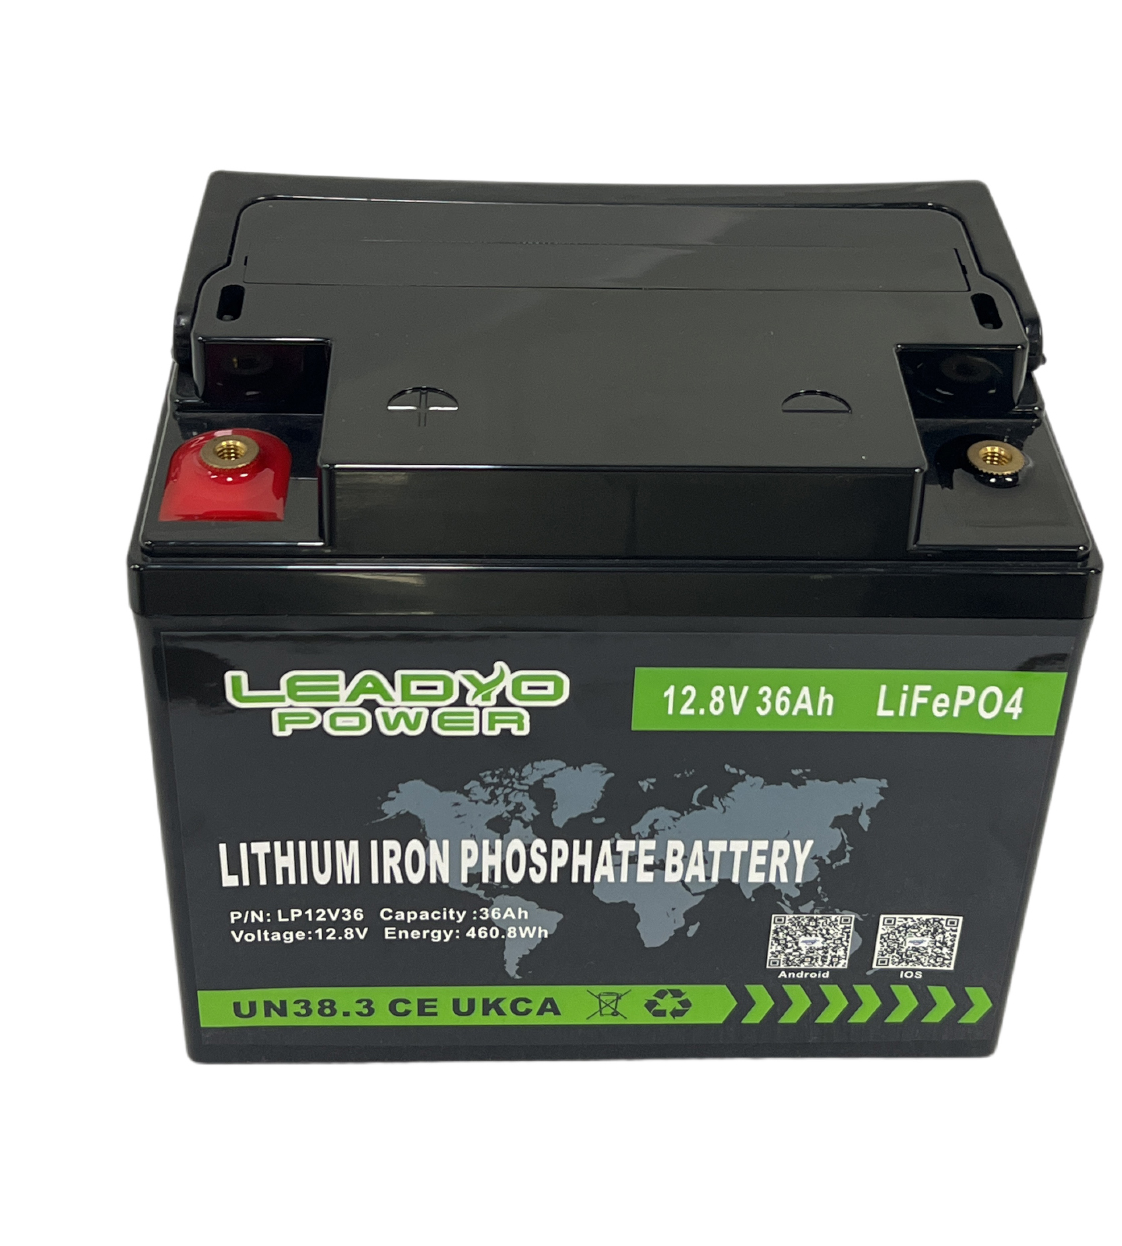 Leadyo Power: Your Trusted Source for LiFePO4 Battery Technology